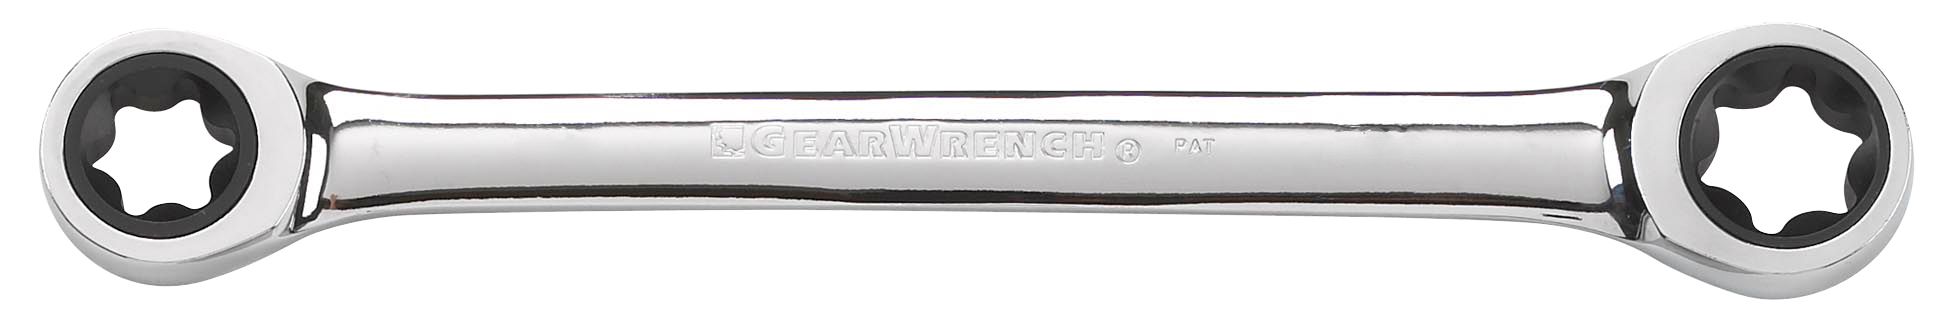 GearWrench E14 x E18 Torx Box-End Wrench, Ratcheting